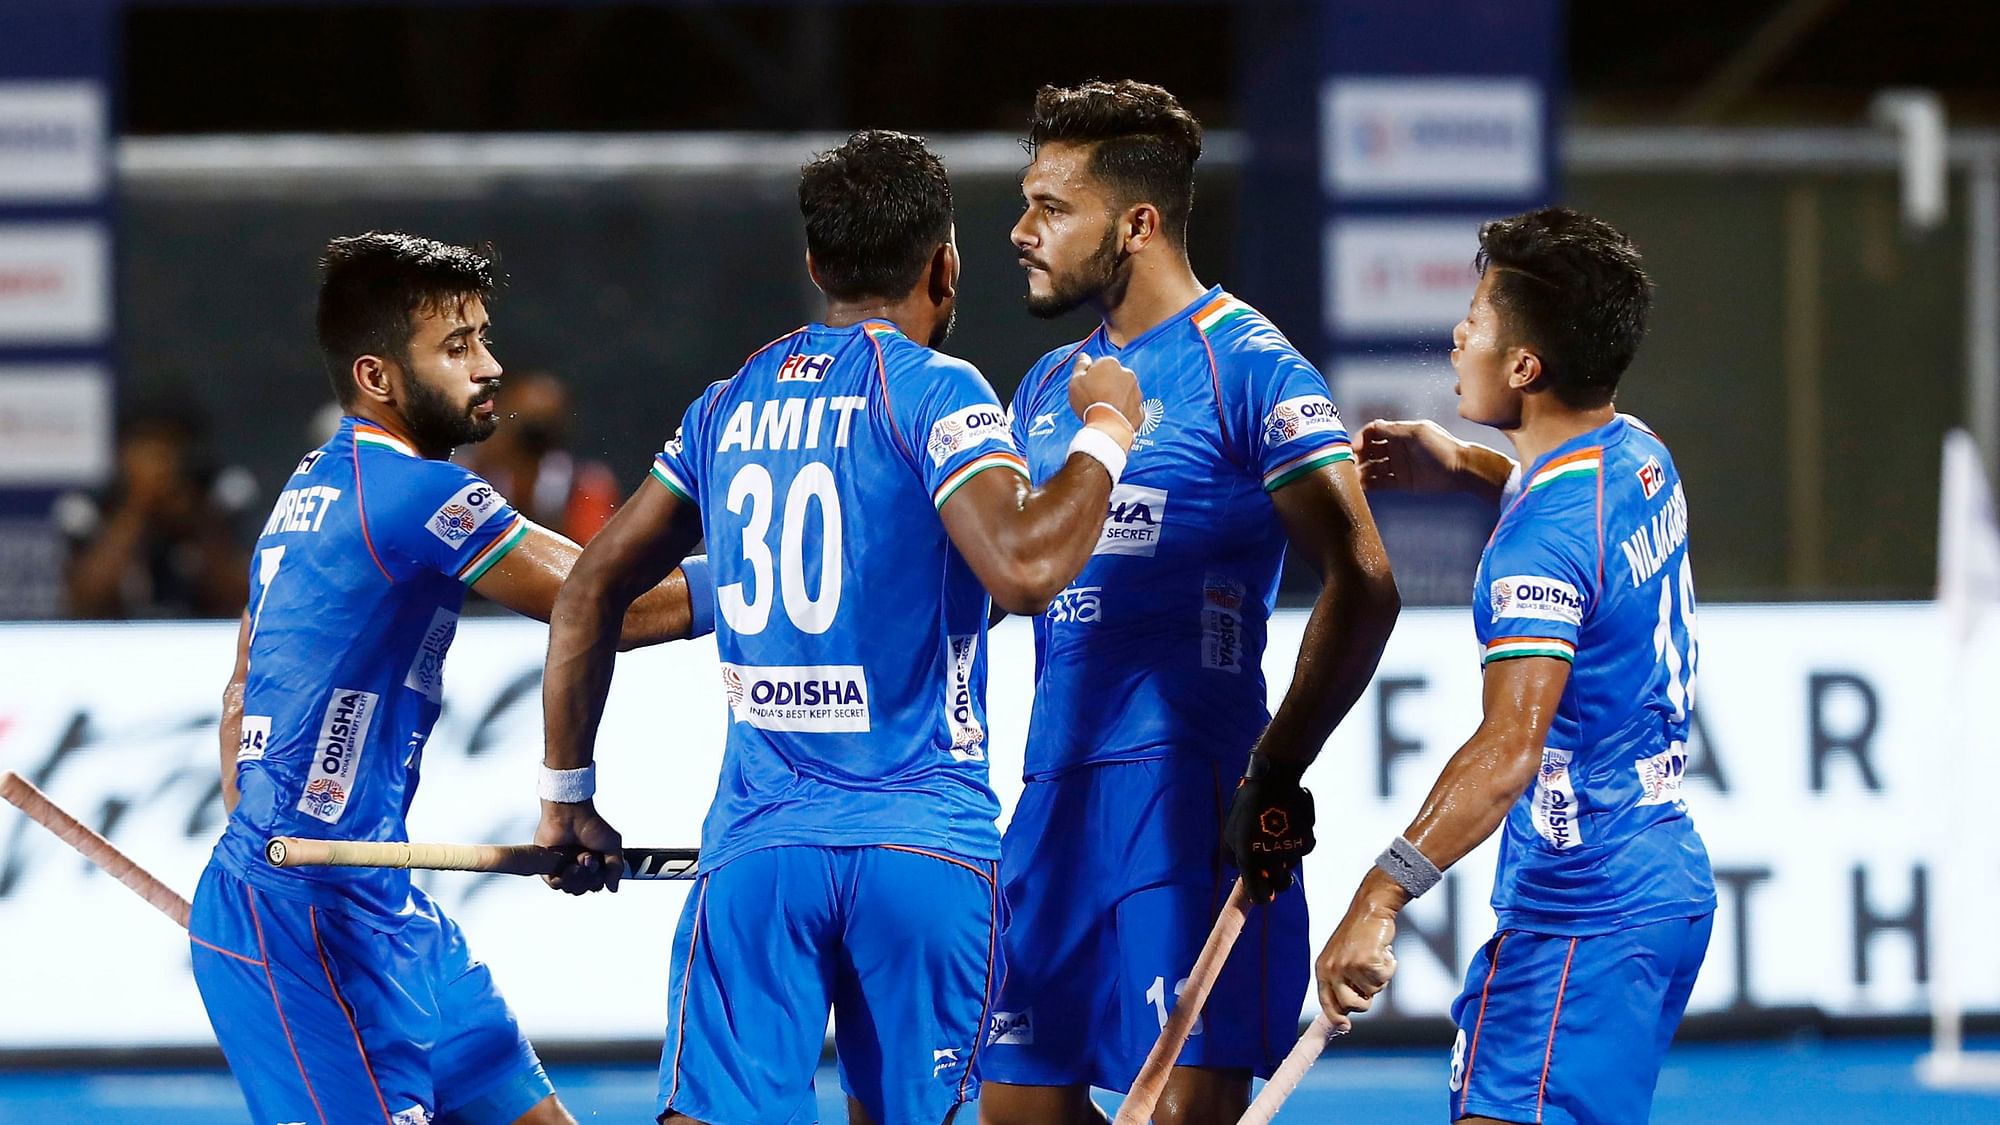 India beat Japan 7-2 to enter the final of the FIH Series Finals hockey tournament in Bhubaneswar.